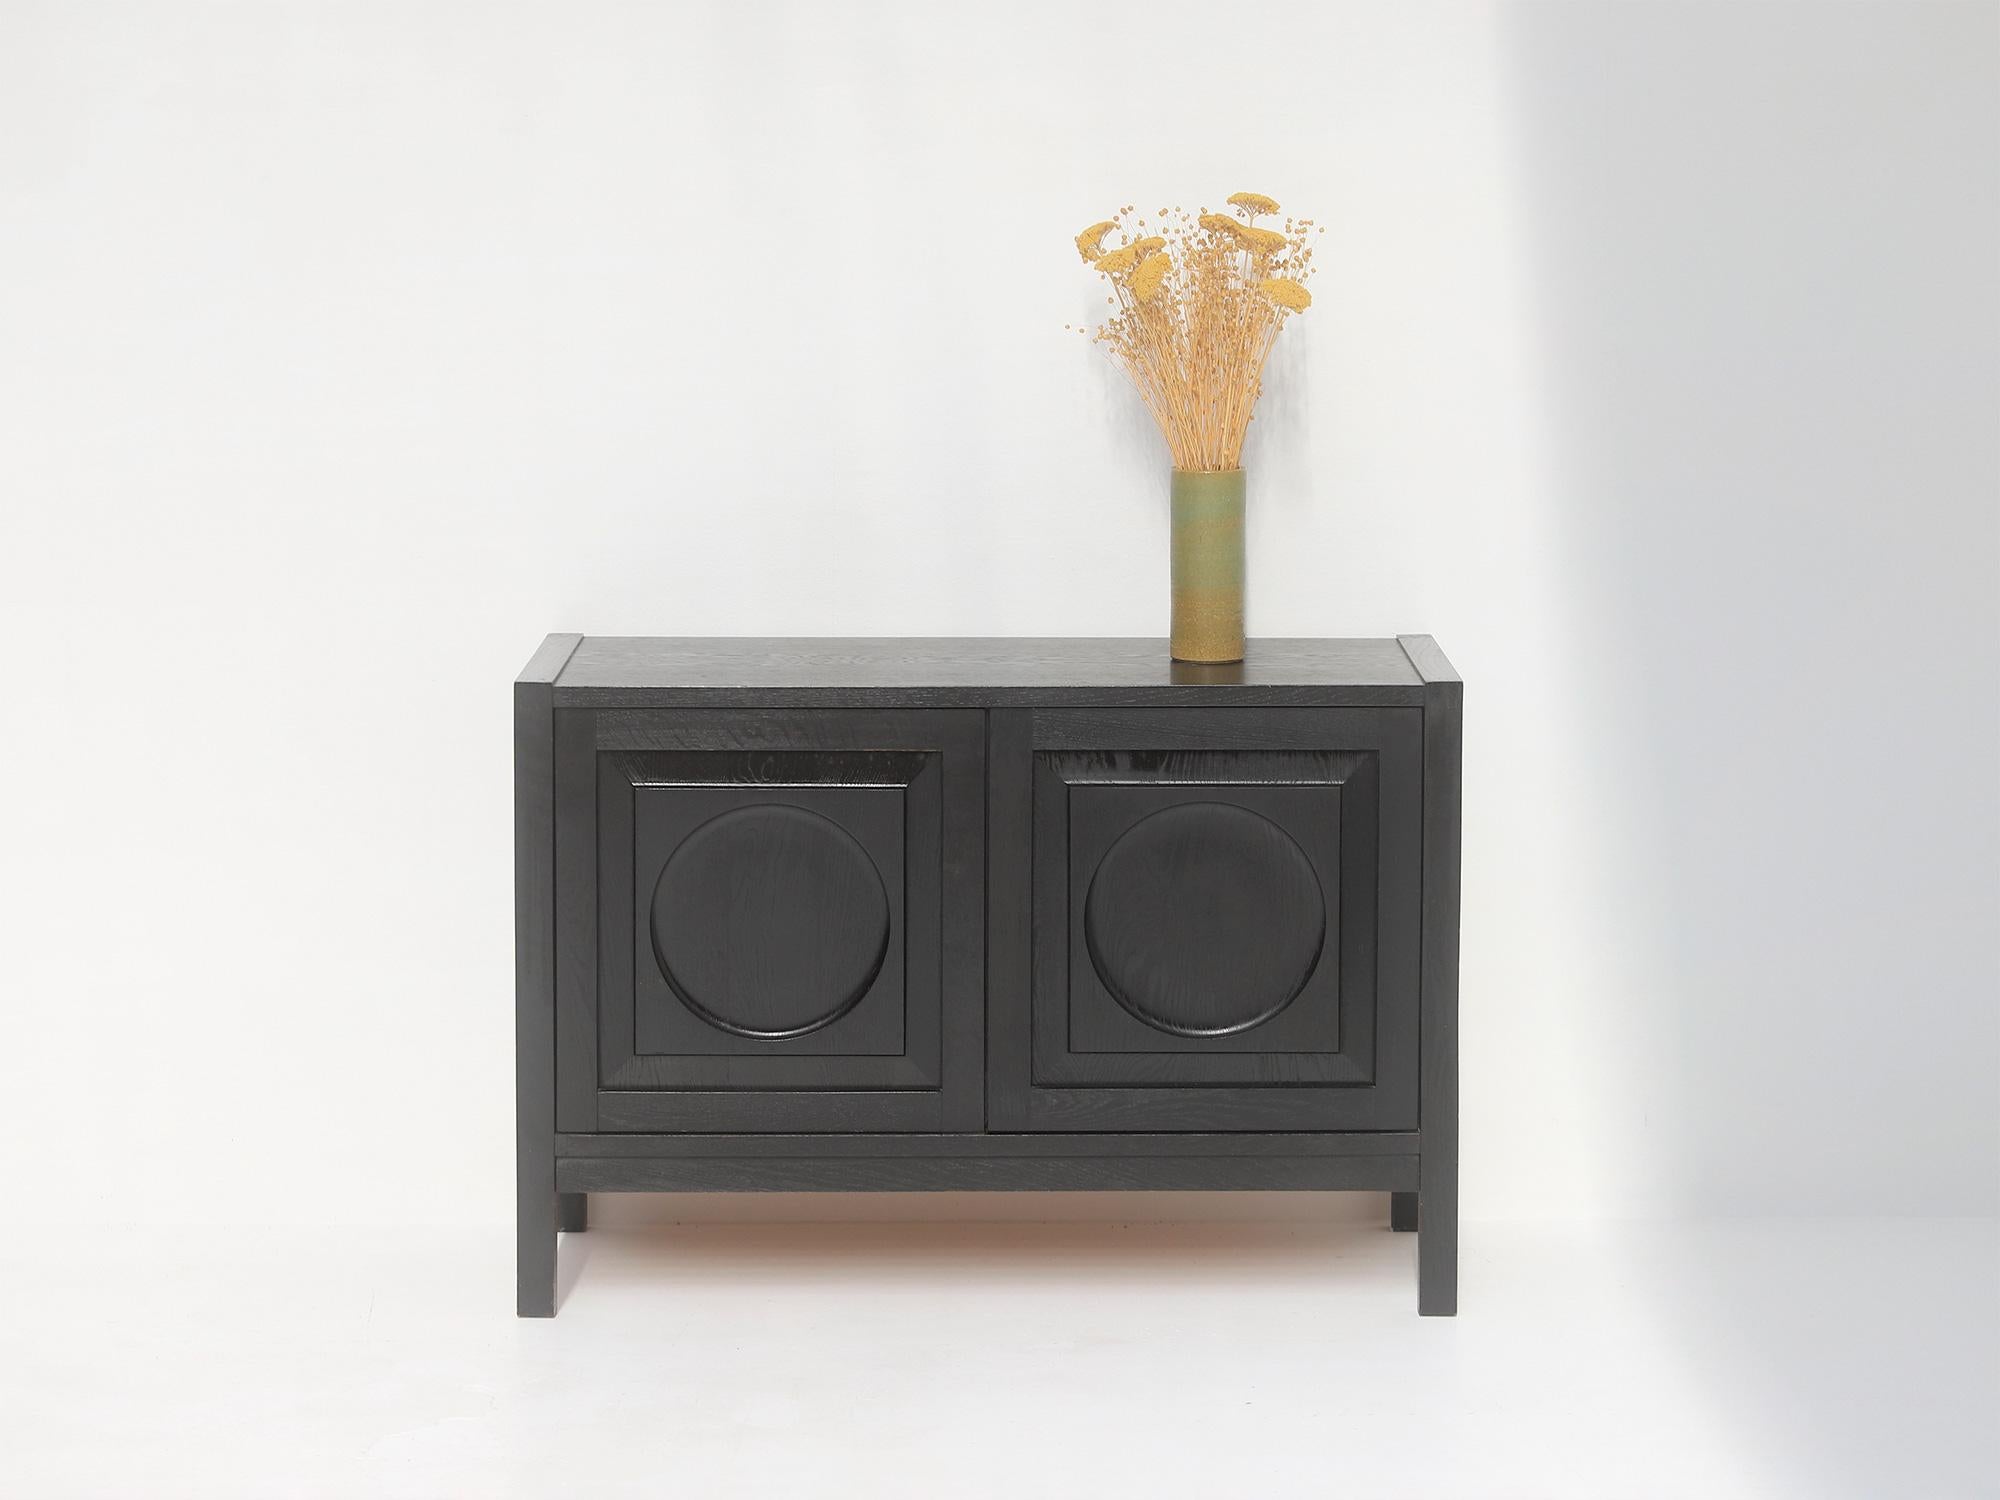 Small sideboard / cabinet produced in the 70s by Defour, Belgium. The front is decorated with a graphical circle pattern carved into the wood. The cabinet has two shelves inside. Stands in a very good and well kept condition.